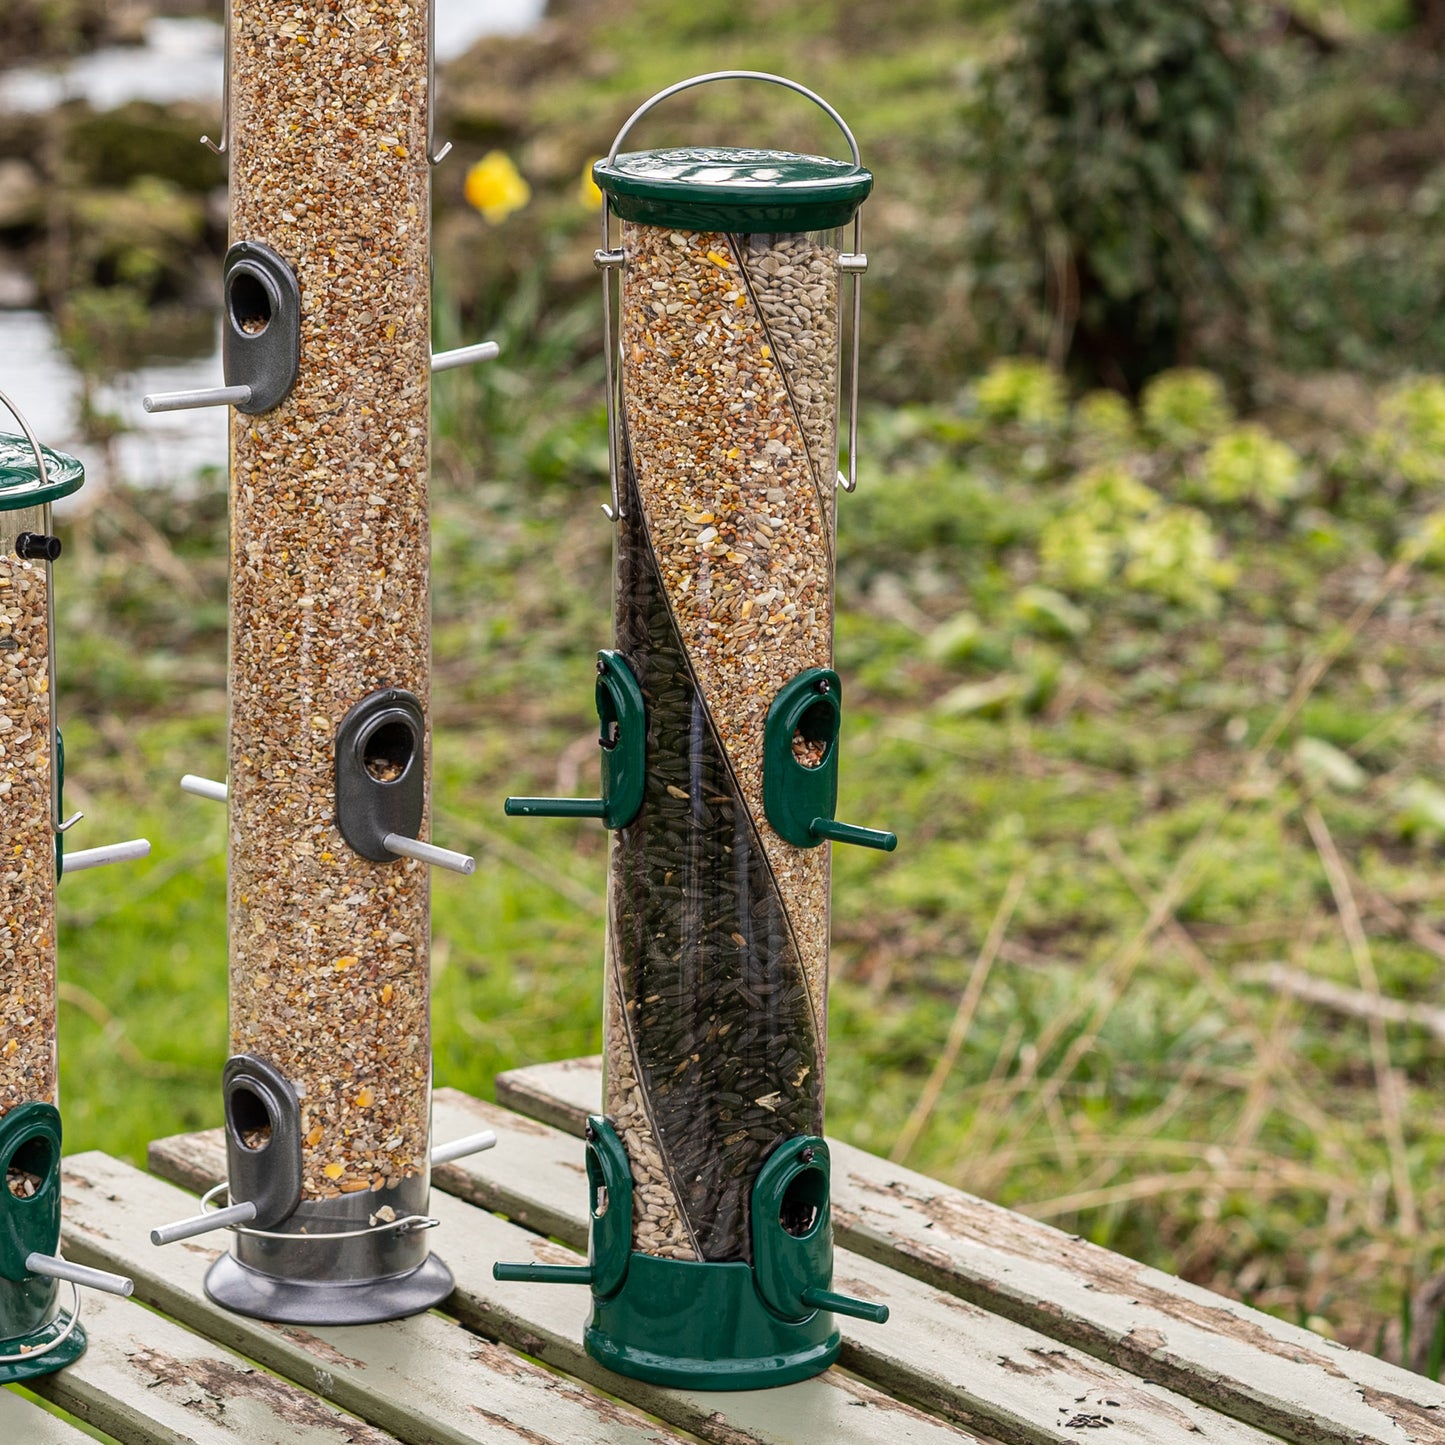 3 seed twist feeder with seed mix in